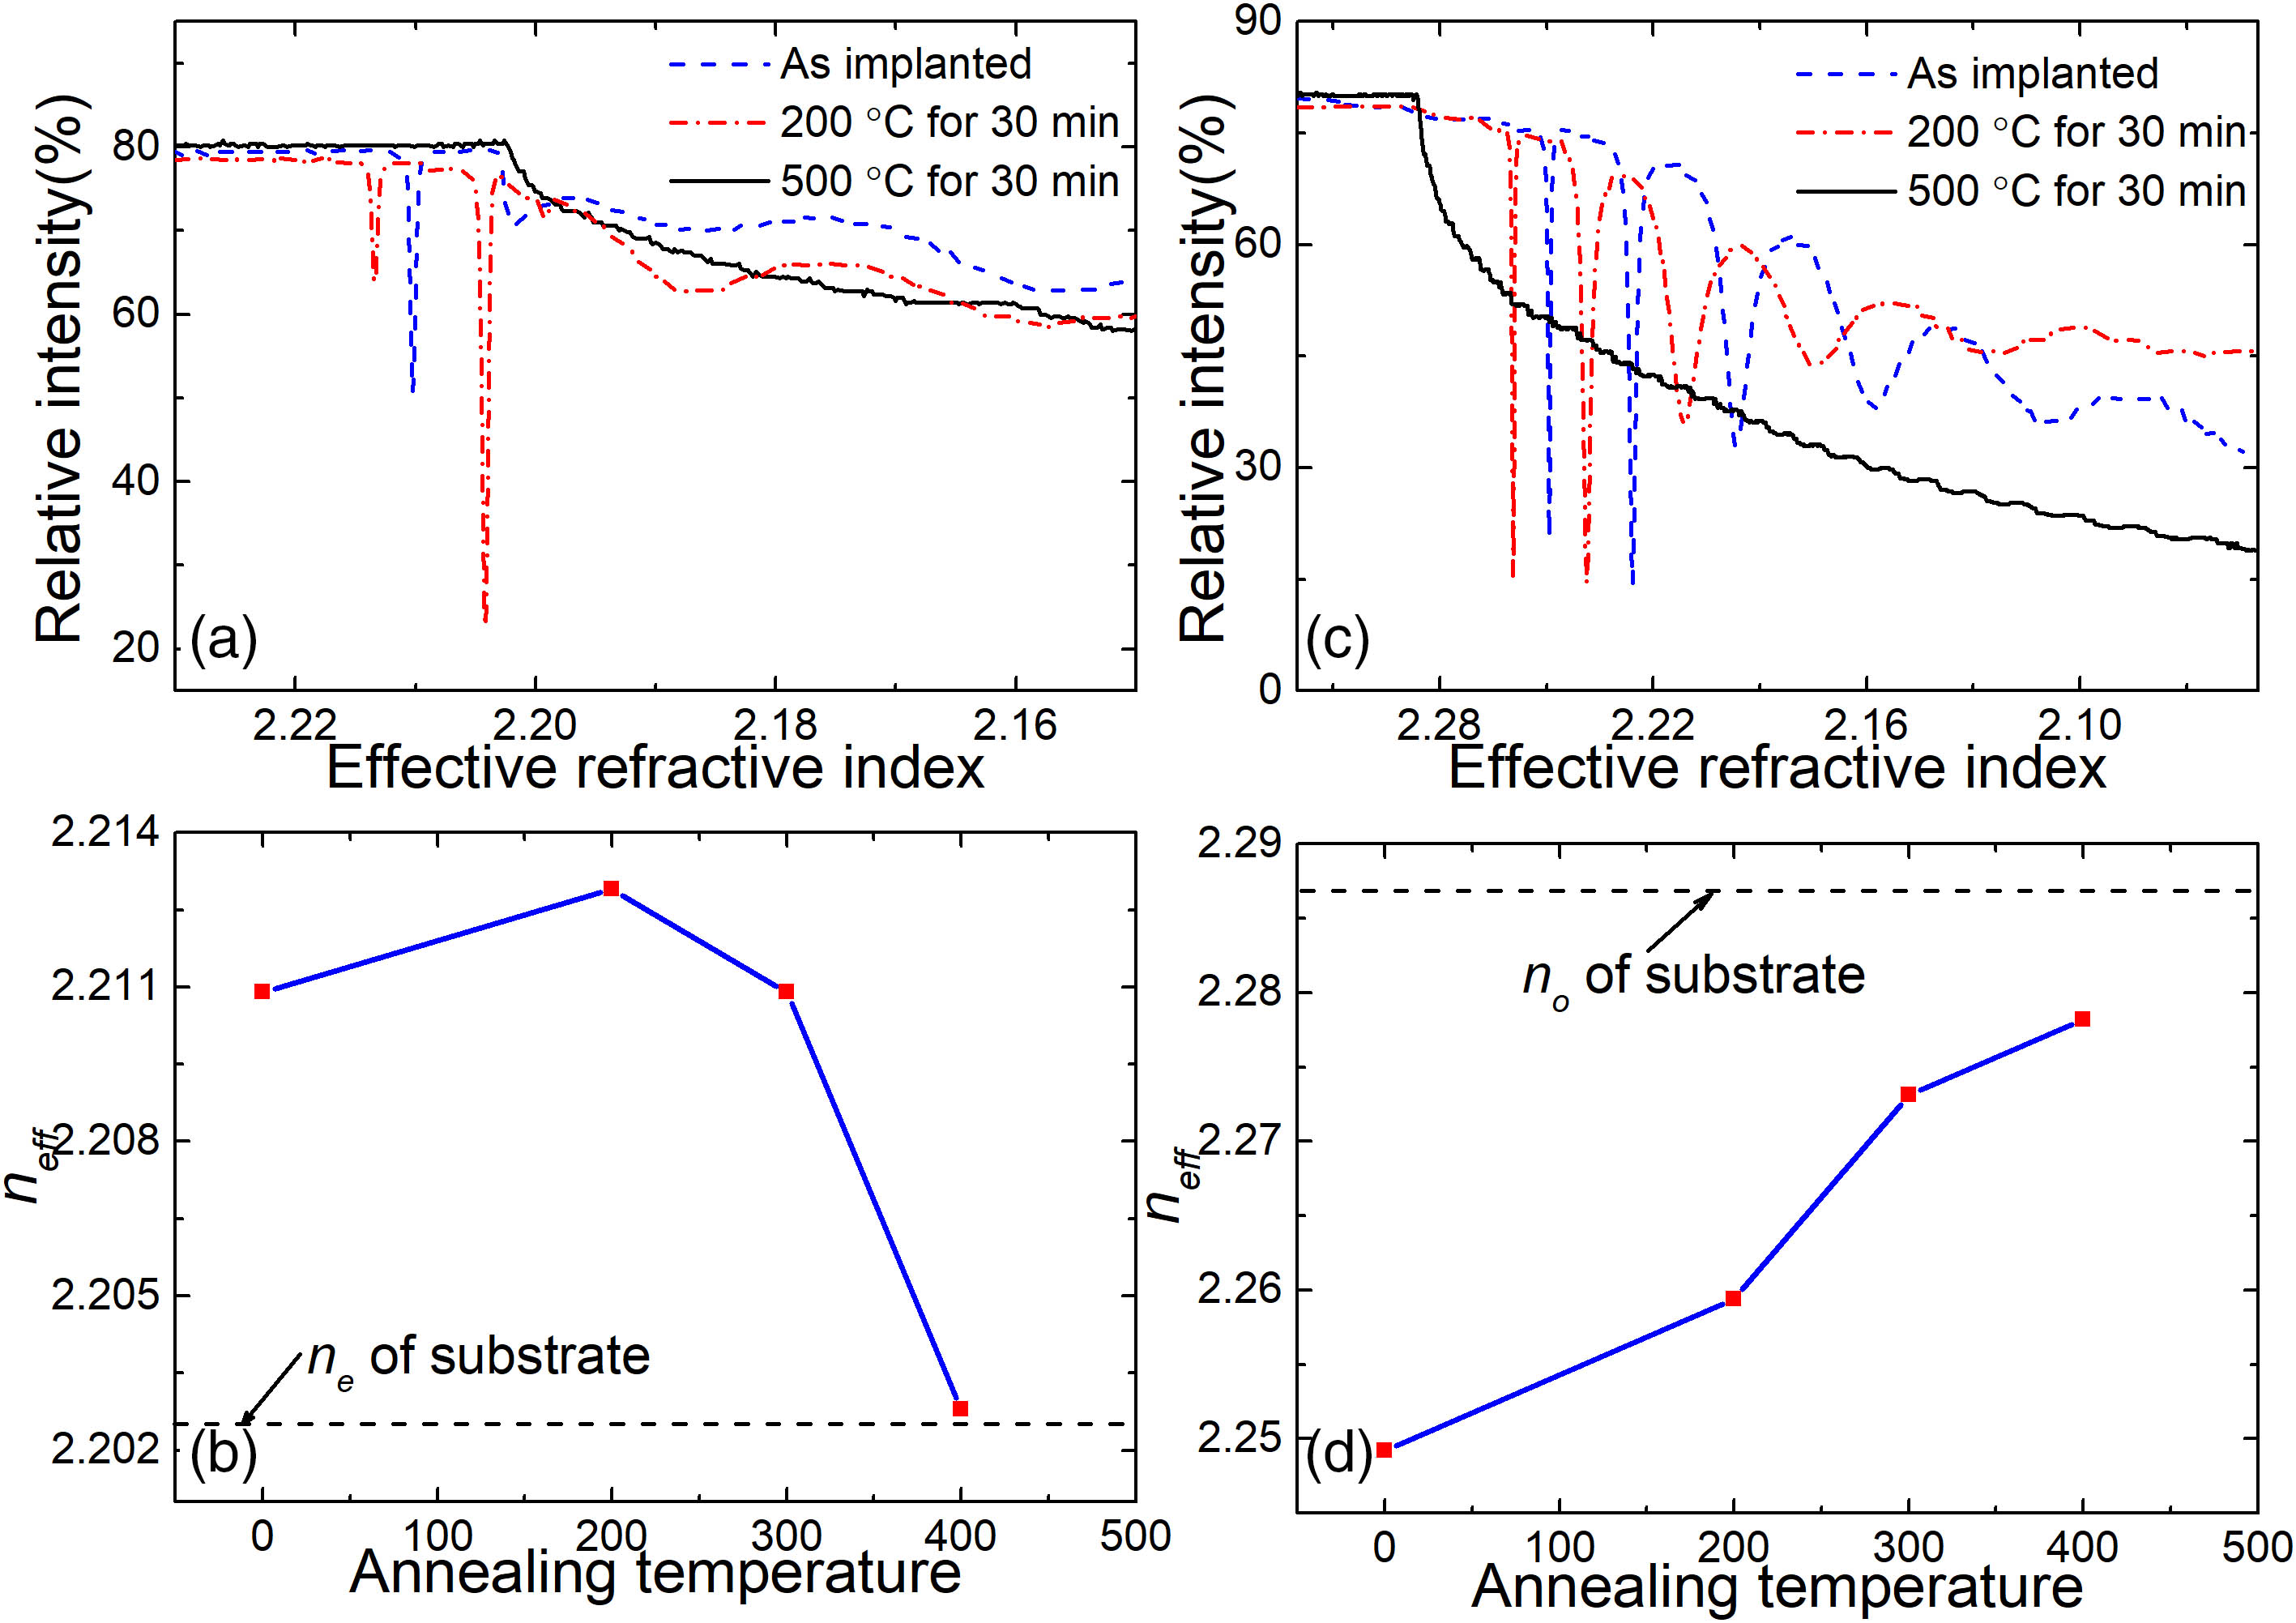 Measured relative intensity of reflected light from the prism versus the effective refractive index at a wavelength of 633 nm before and after annealing for O implanted planar waveguides: (a) TM polarized light and (c) TE polarized light. Effective refractive indices of the (b) TM0 mode and (d) TE0 mode varying with different annealing temperatures for the same time of 30 min.